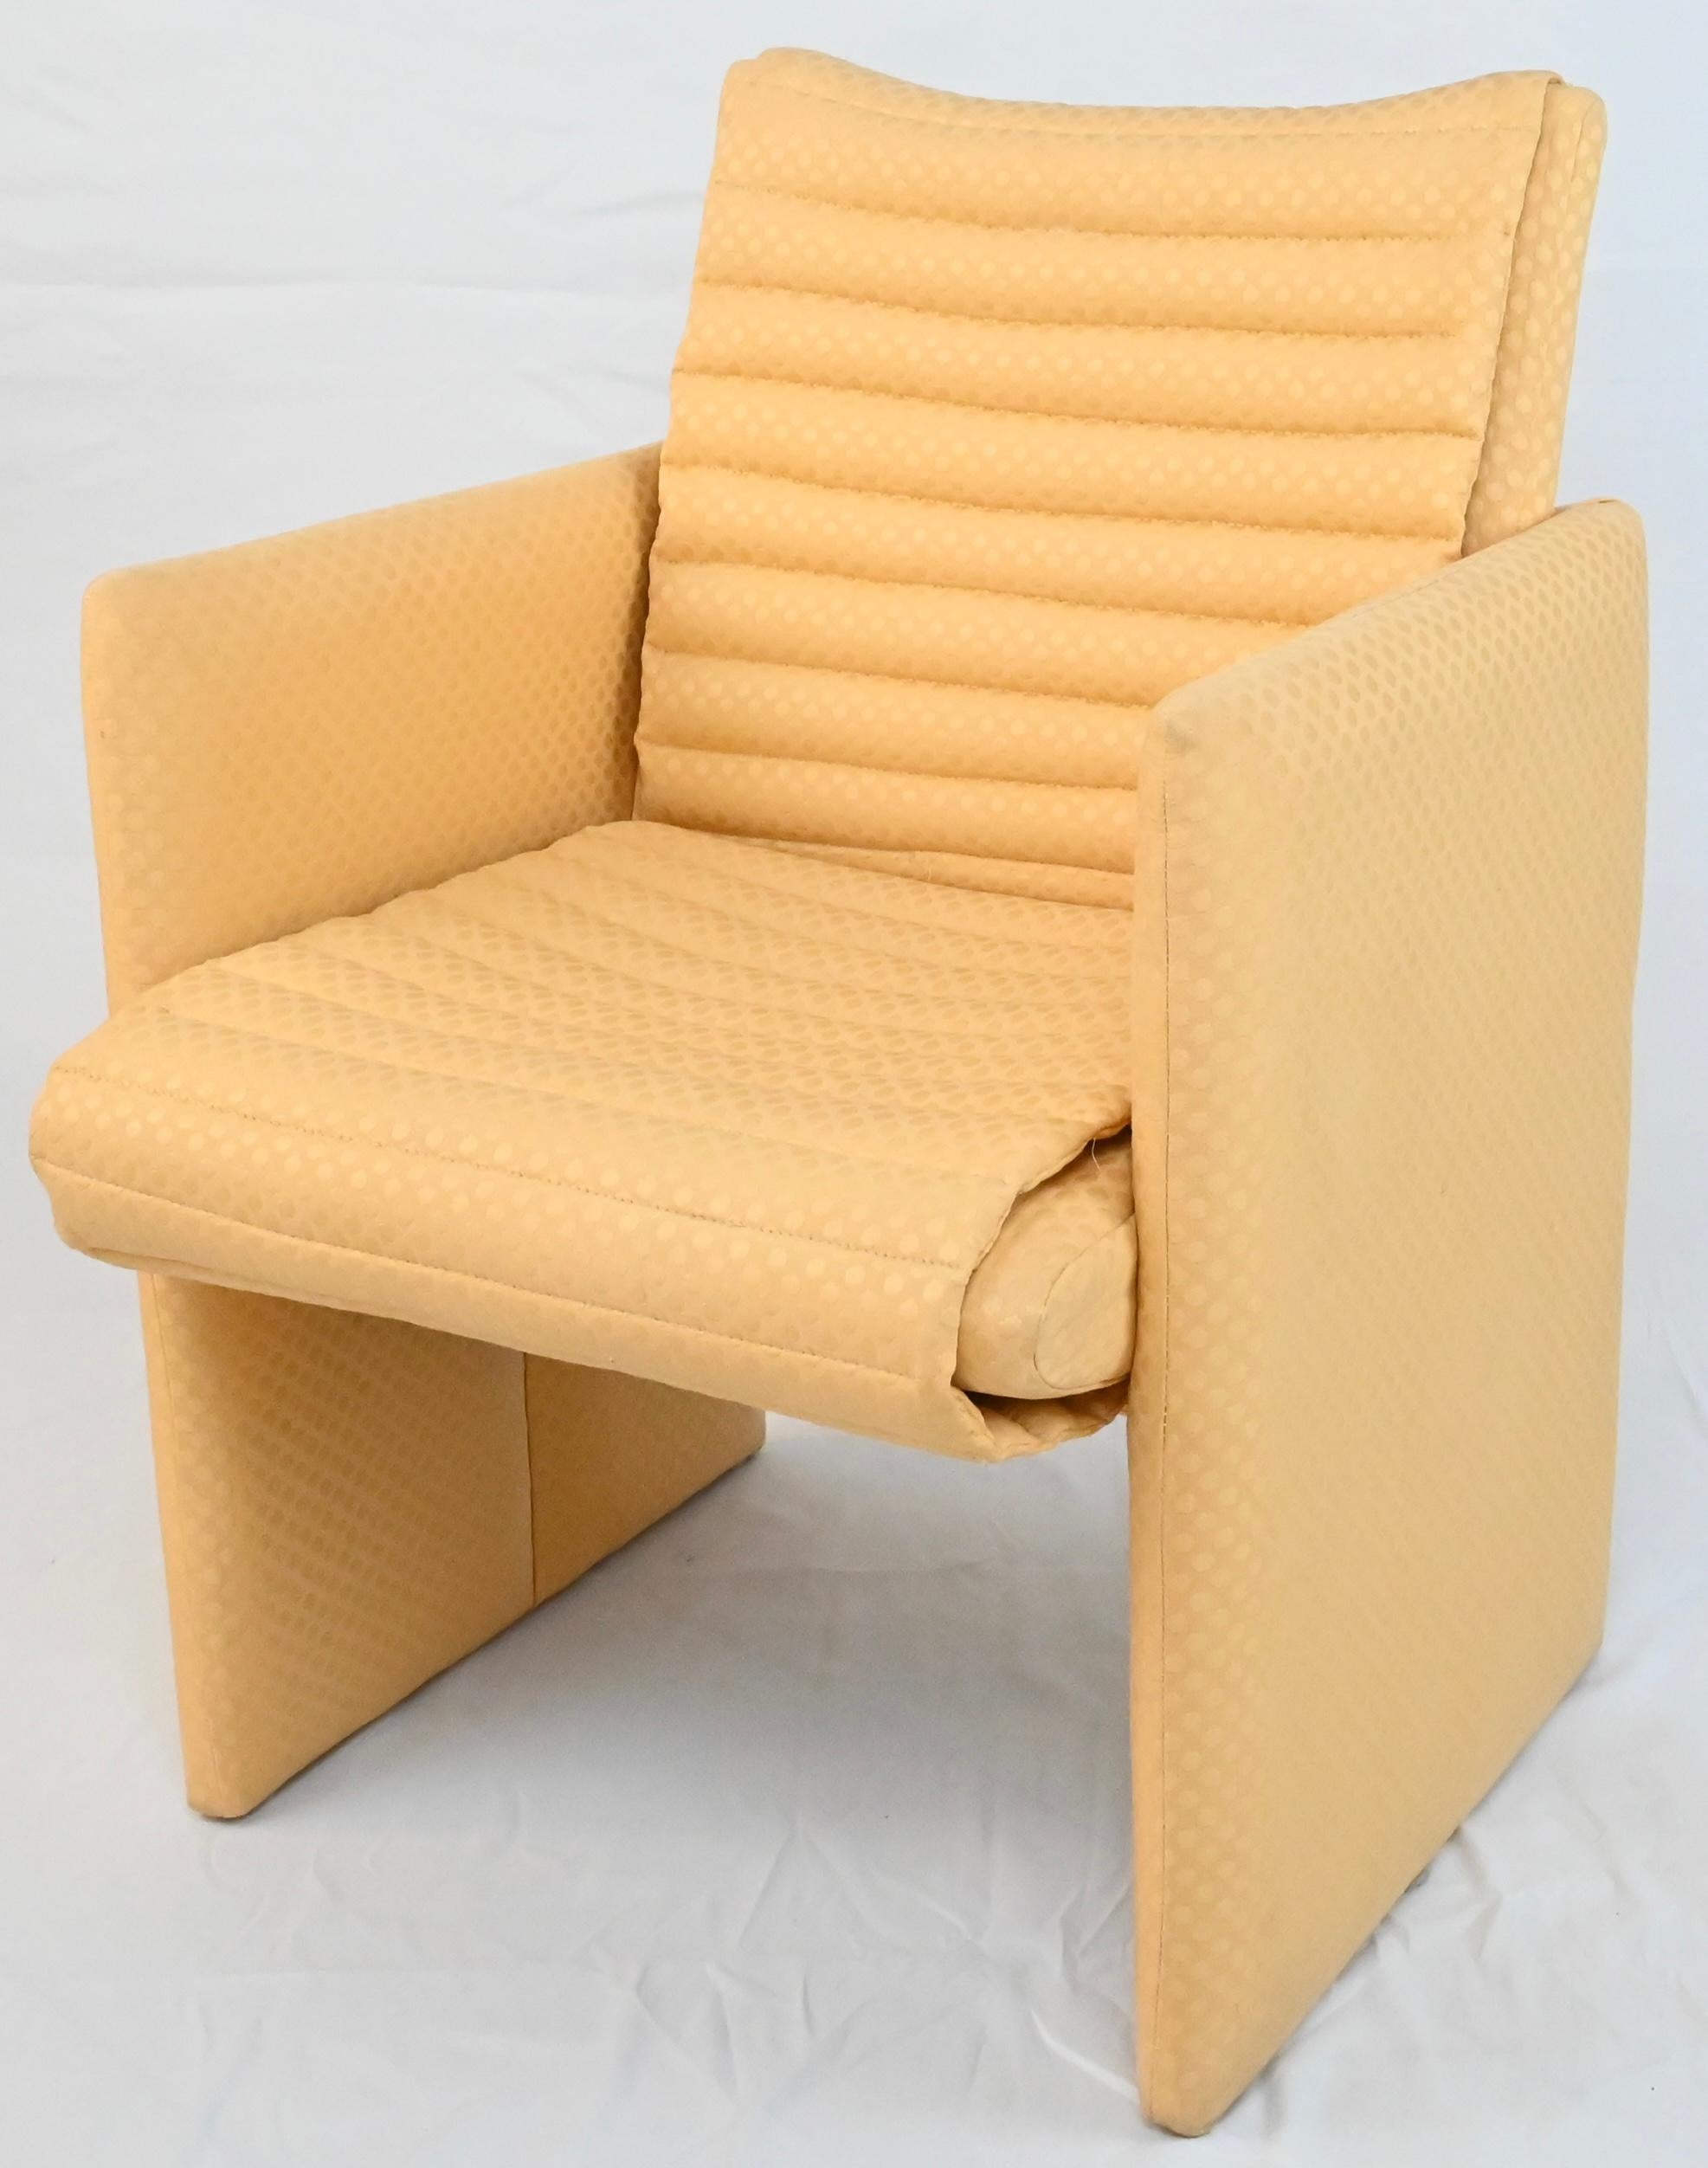 A fine and rare set of 4 upholstered armchairs with quilted channels that are tufted with very good quality pale yellow fabric. The true color of the fabric can be viewed in the last 2 images. Photograph lighting did not capture this in all photos.